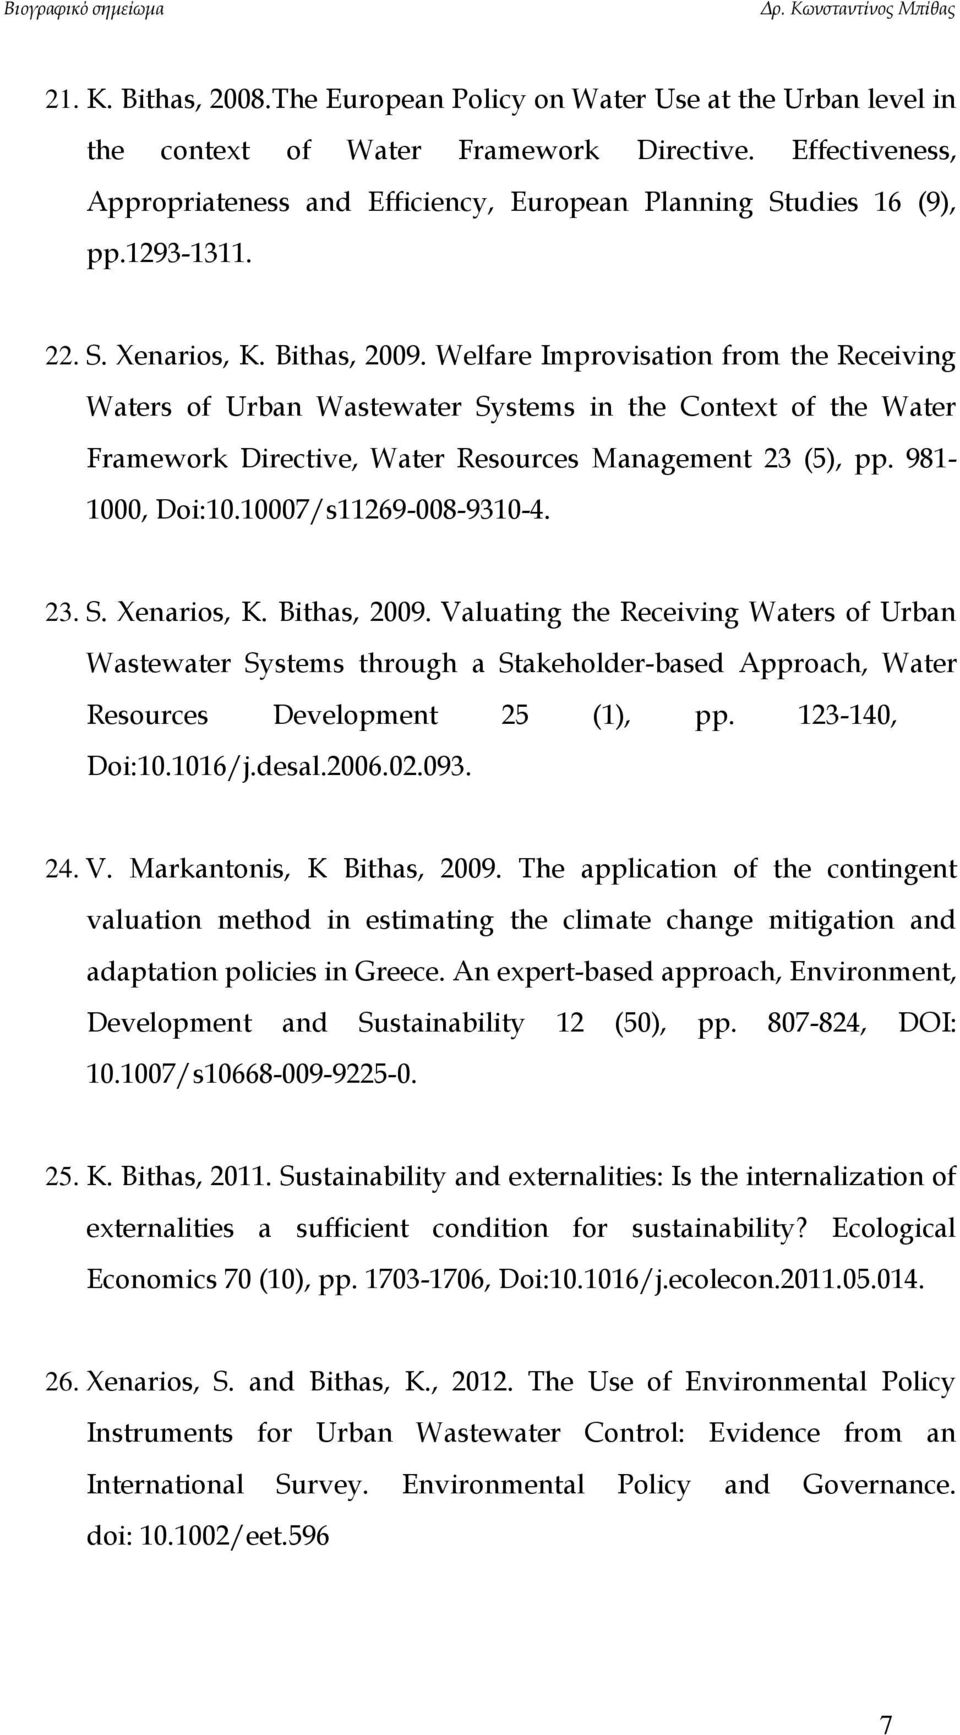 Welfare Improvisation from the Receiving Waters of Urban Wastewater Systems in the Context of the Water Framework Directive, Water Resources Management 23 (5), pp. 981-1000, Doi:10.